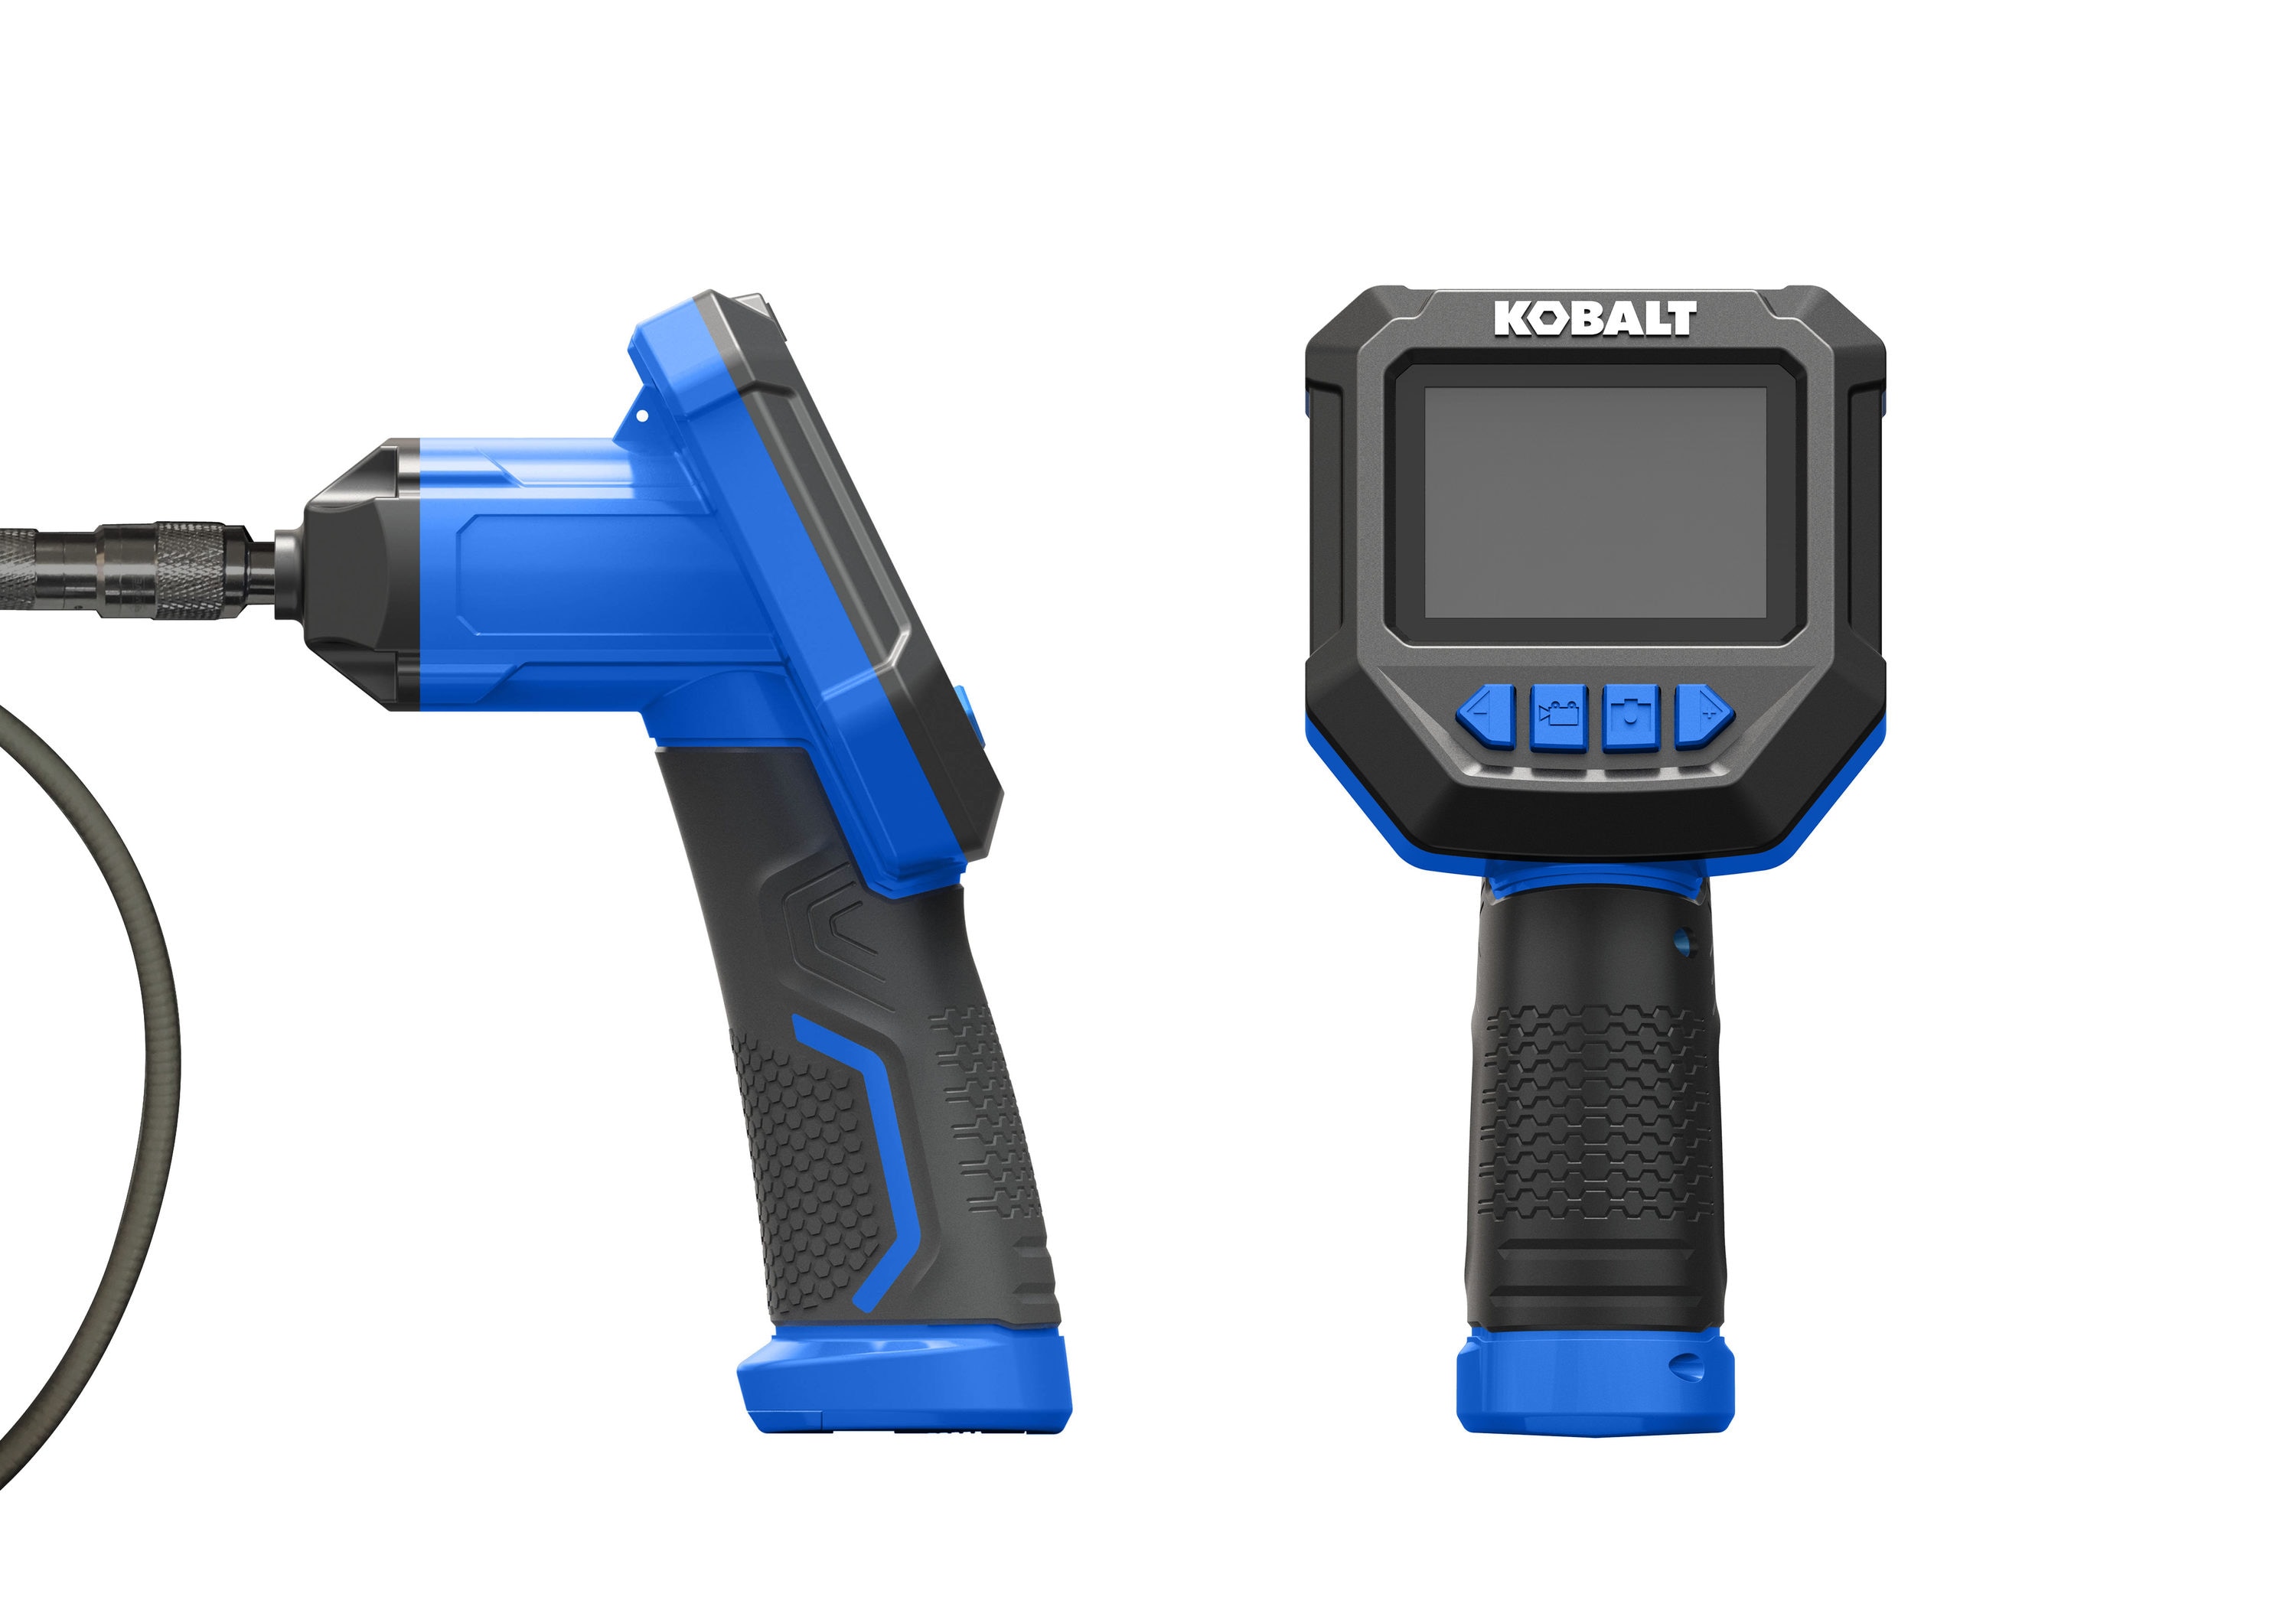 Kobalt LED Inspection Camera with Memory Card in the Inspection